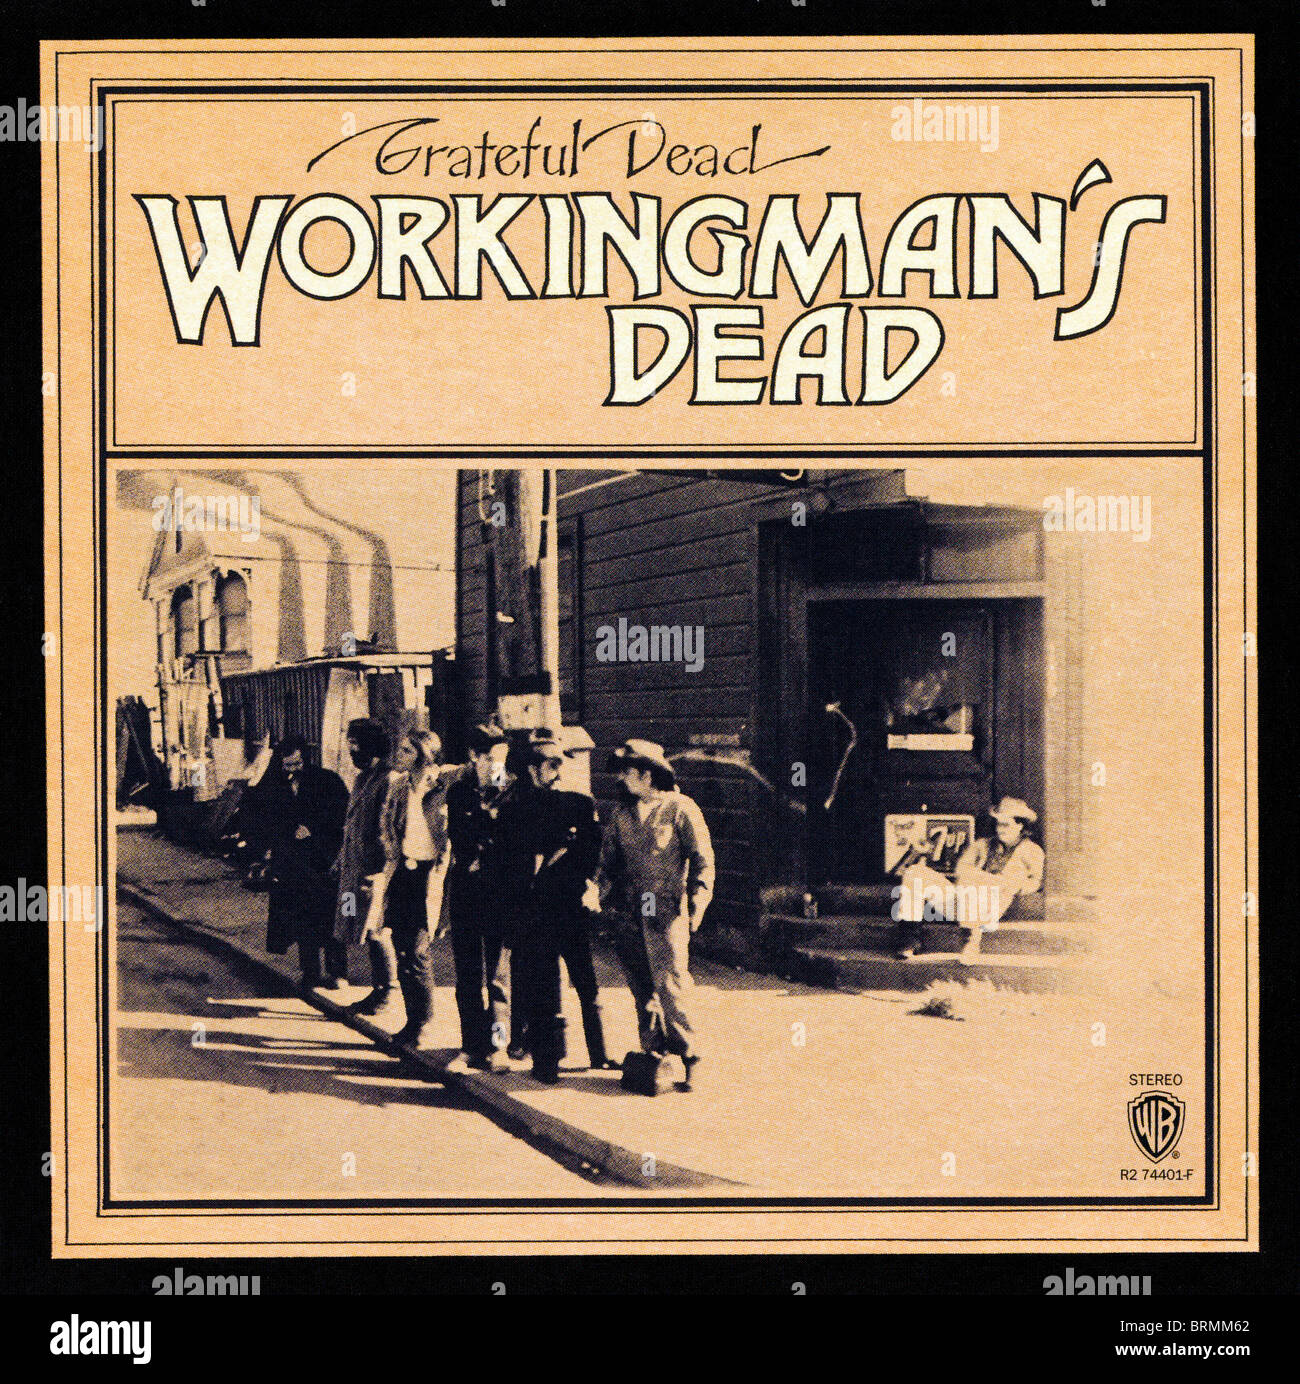 Album cover WORKINGMAN'S DEAD album by the Grateful Dead released 1970 by Warner Bros. Records Stock Photo